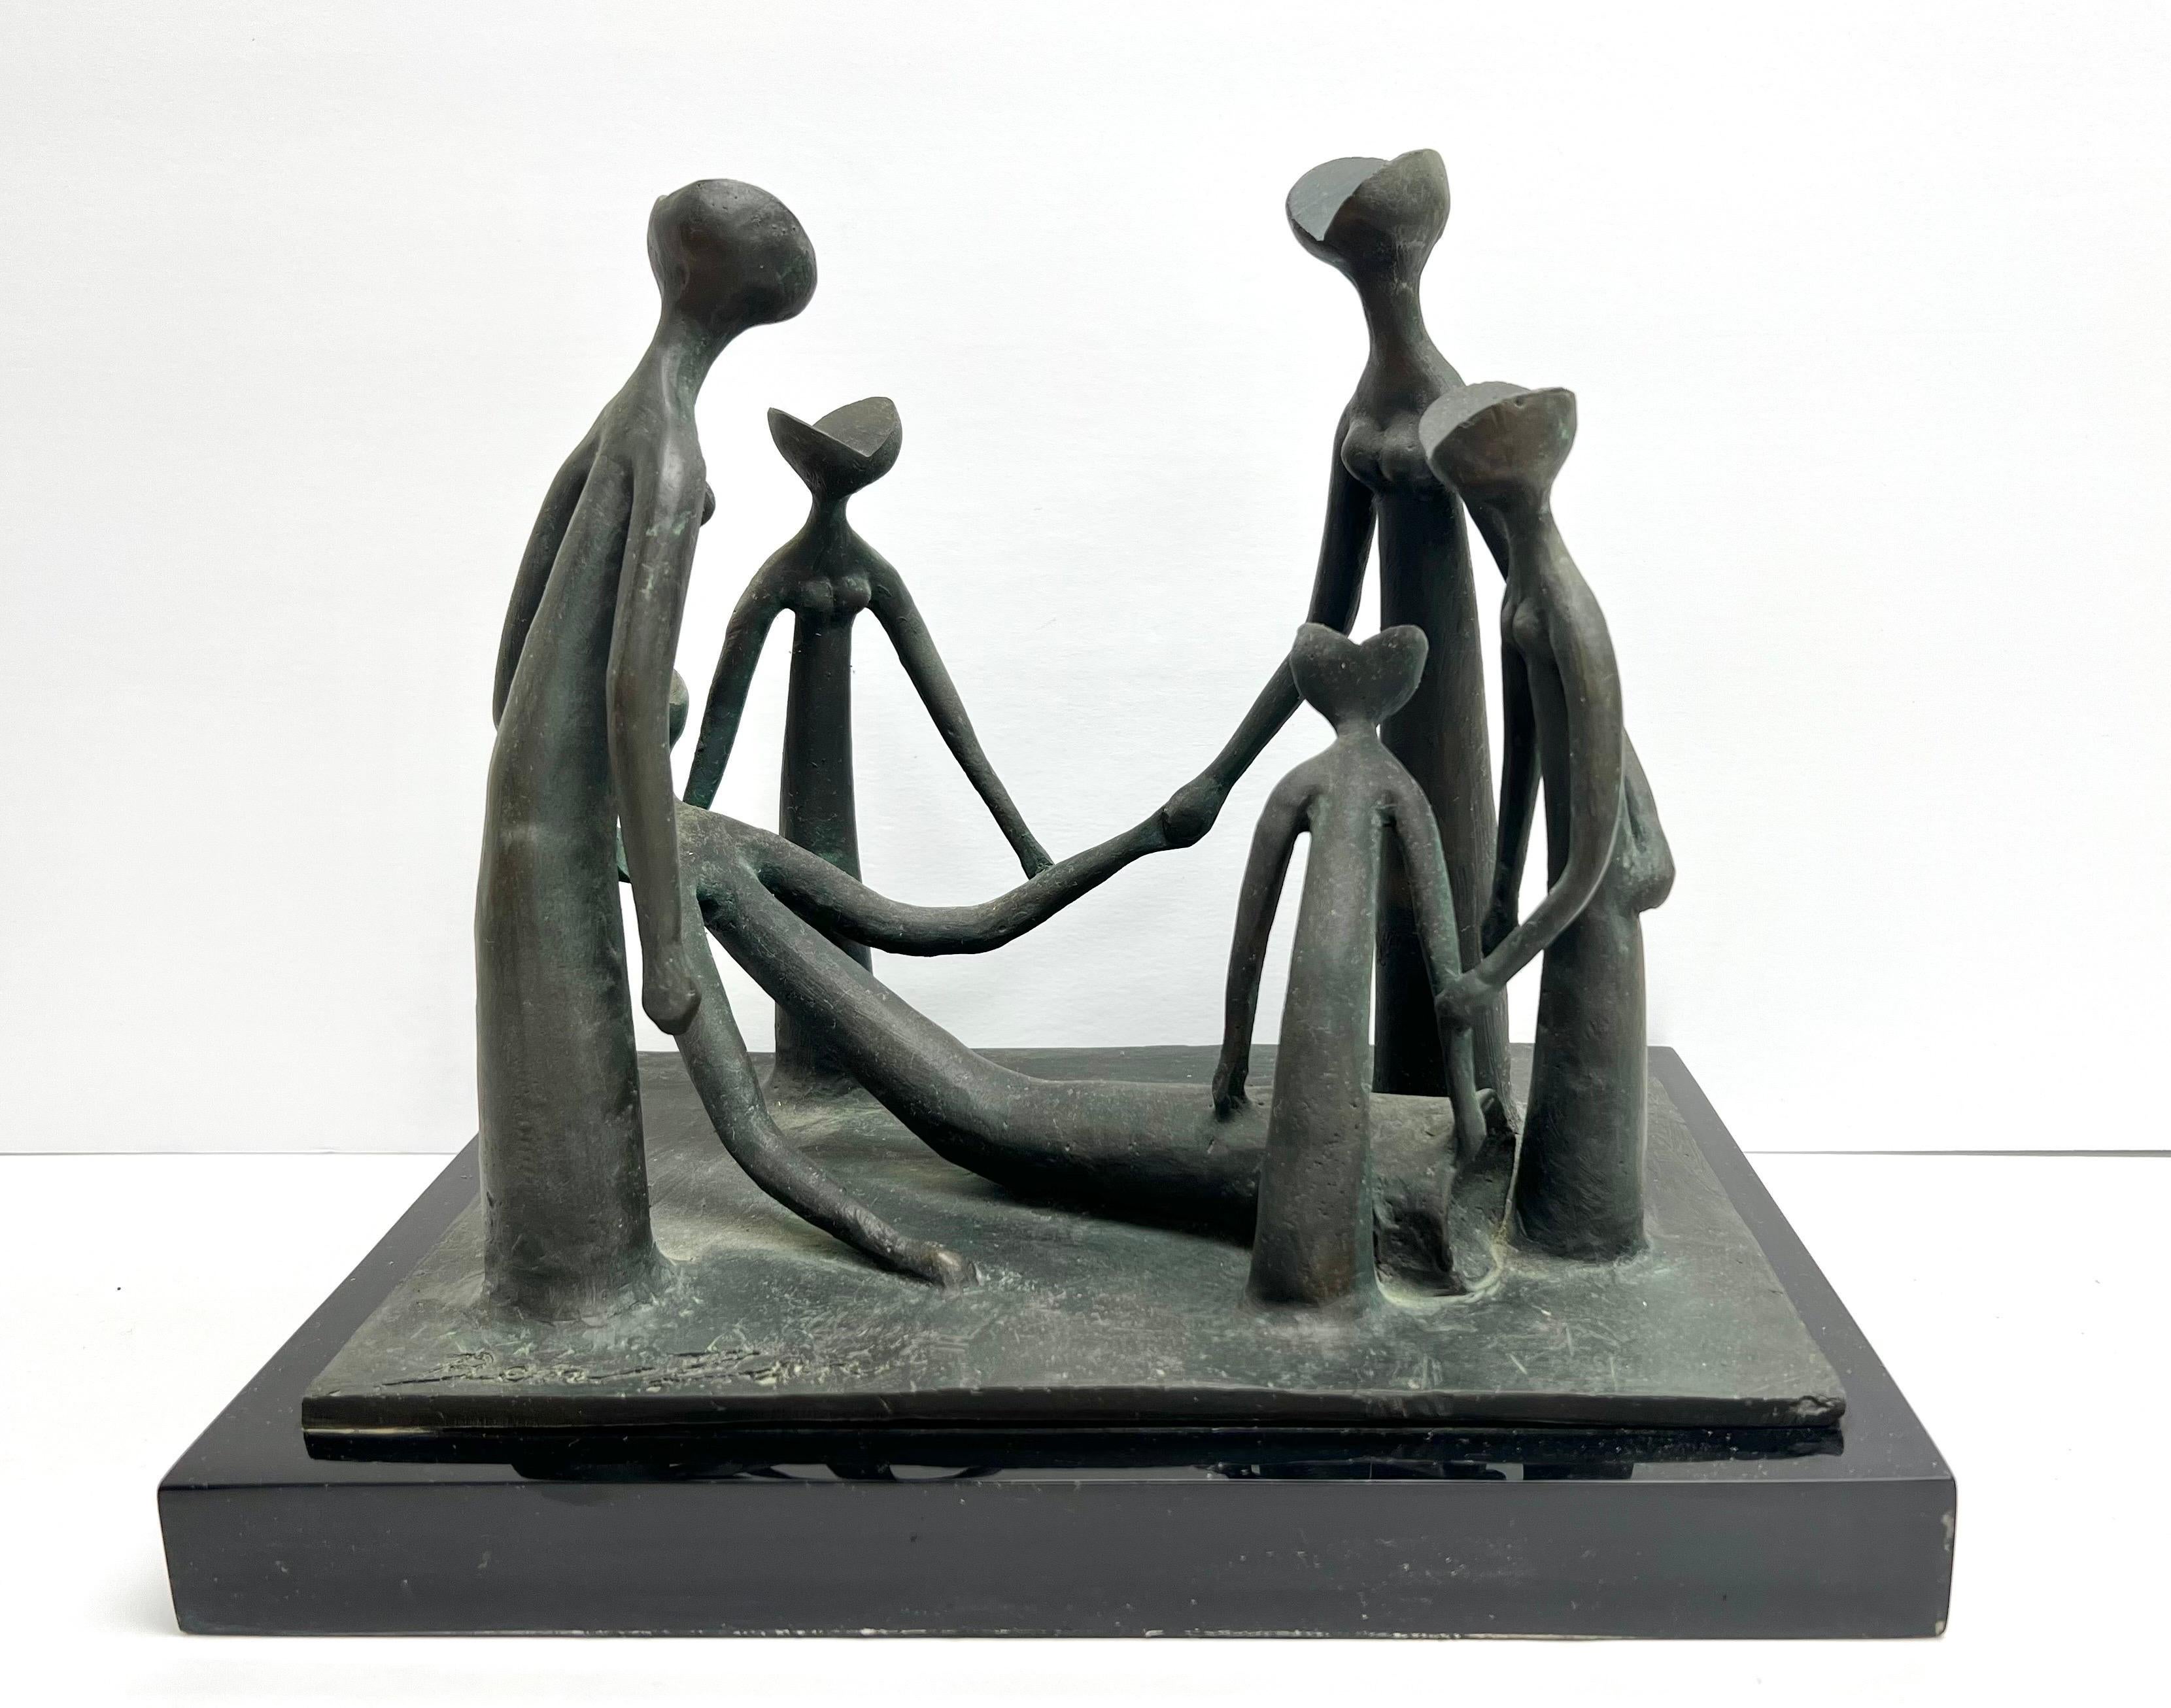 Bronze sculpture by Ben Zvi. The treatment of the figures is quite interesting bordering the lines of reality, abstraction and geometry all in one. There is a quiet dynamism to this sculpture, somehow it’s like you are witnessing a secret or